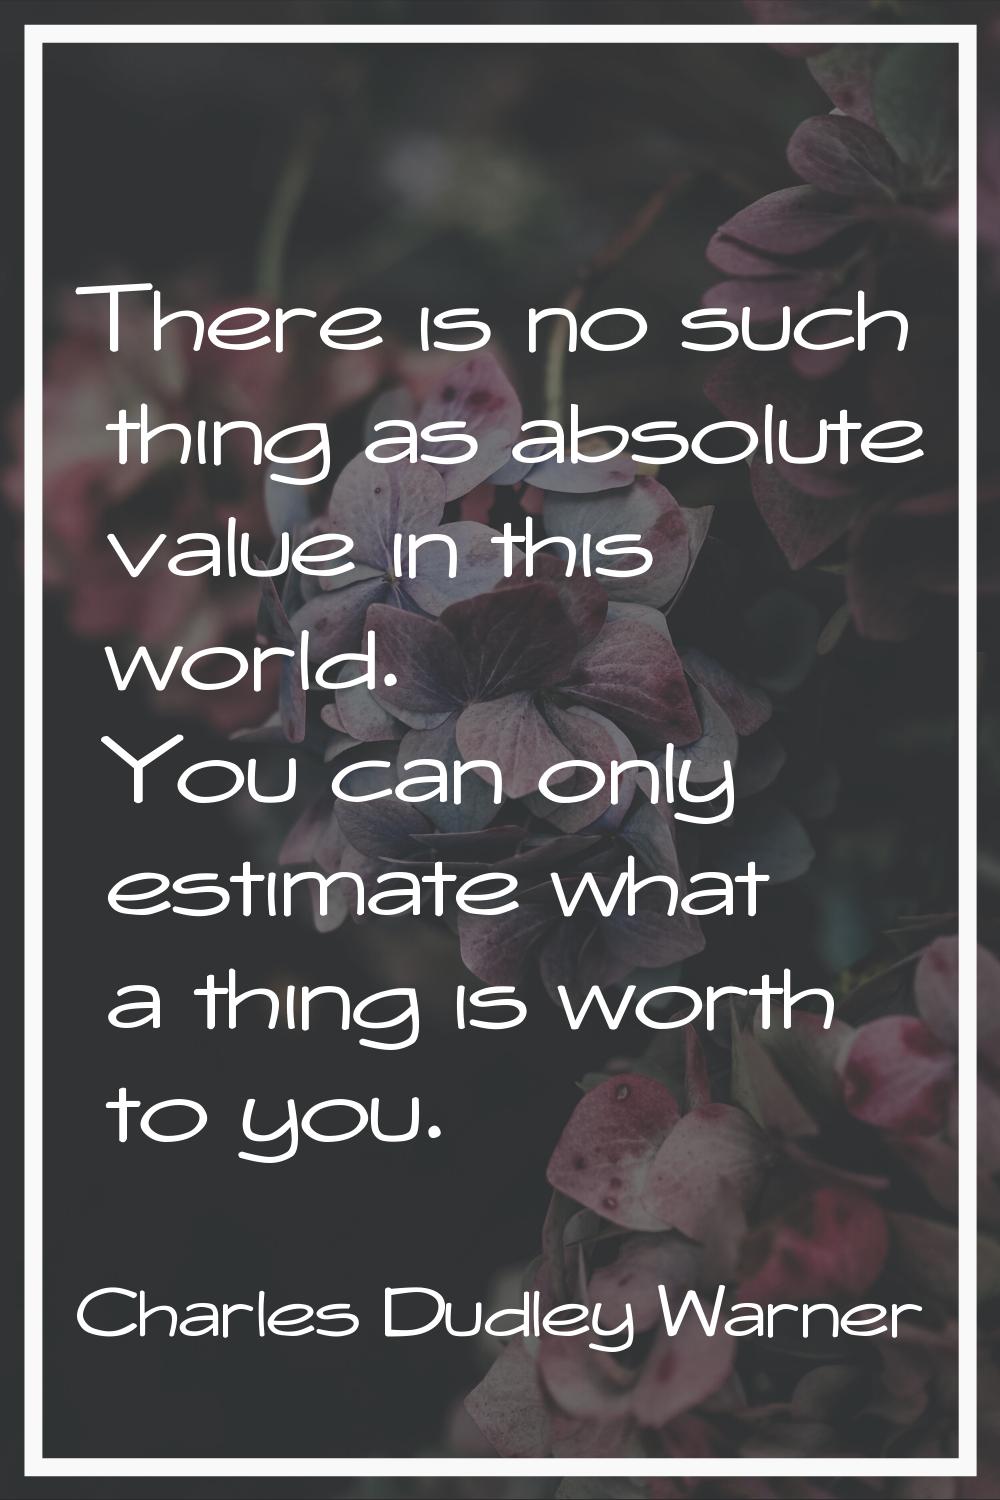 There is no such thing as absolute value in this world. You can only estimate what a thing is worth